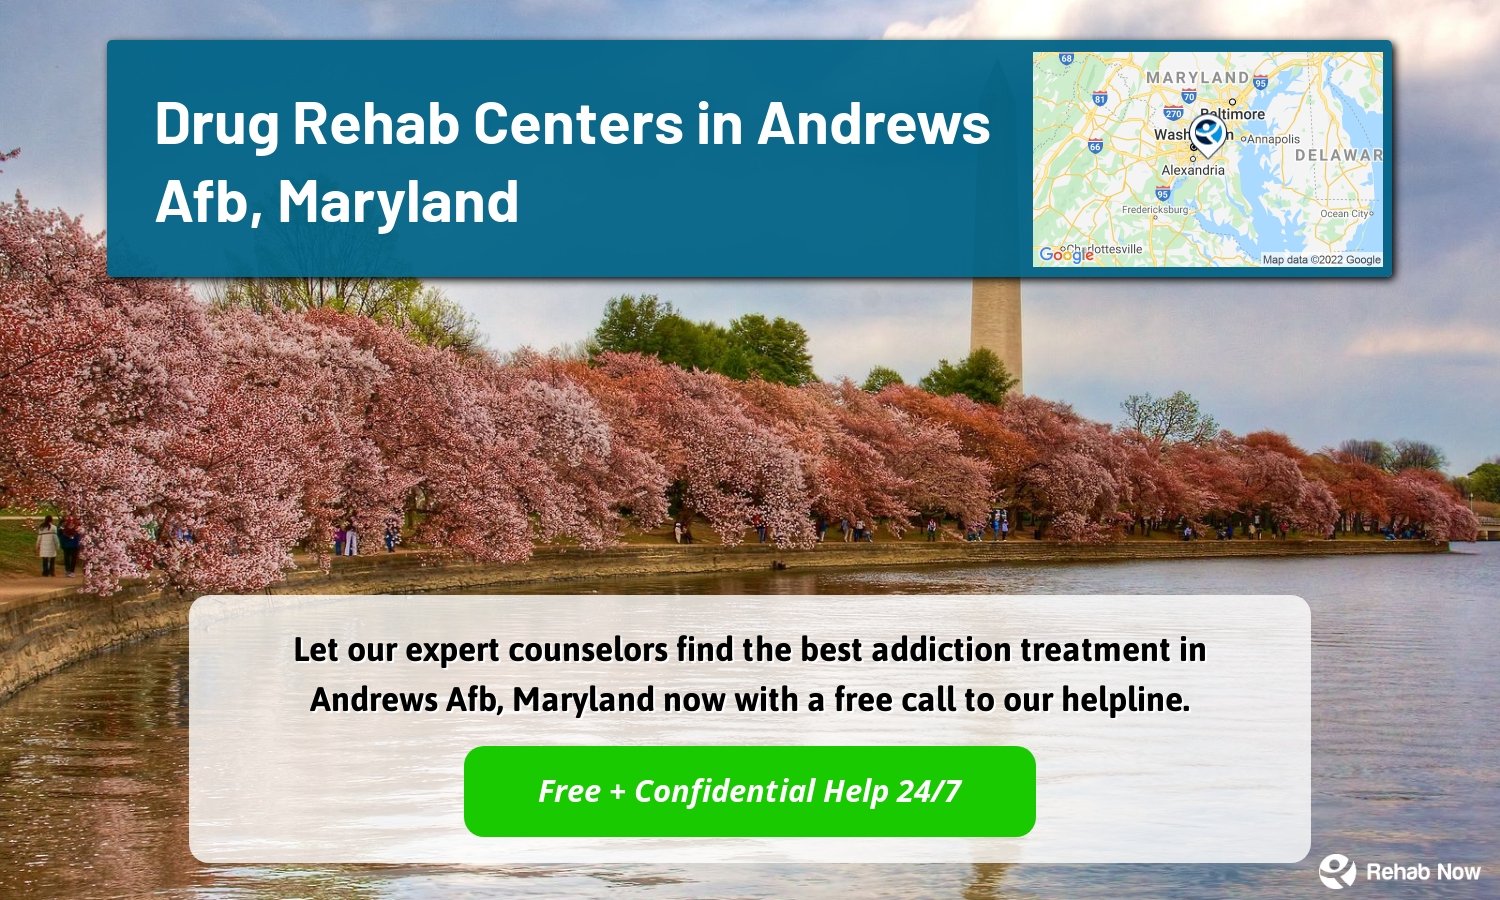 Let our expert counselors find the best addiction treatment in Andrews Afb, Maryland now with a free call to our helpline.